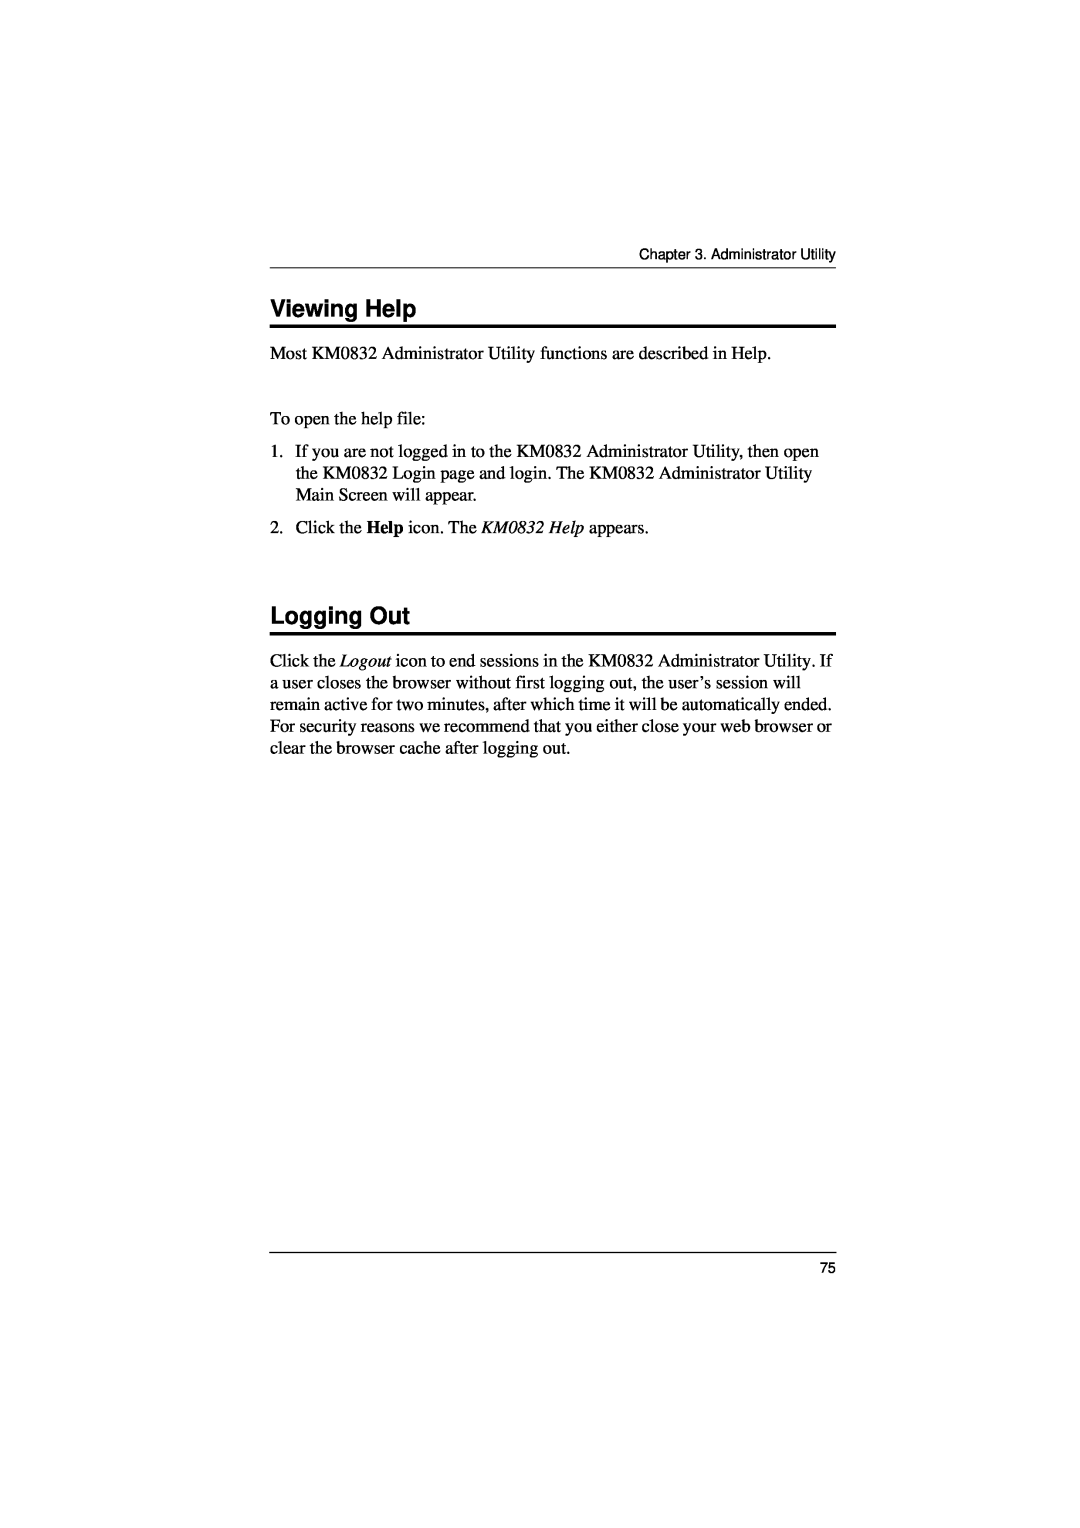 ATEN Technology KM0832 user manual Viewing Help, Logging Out 